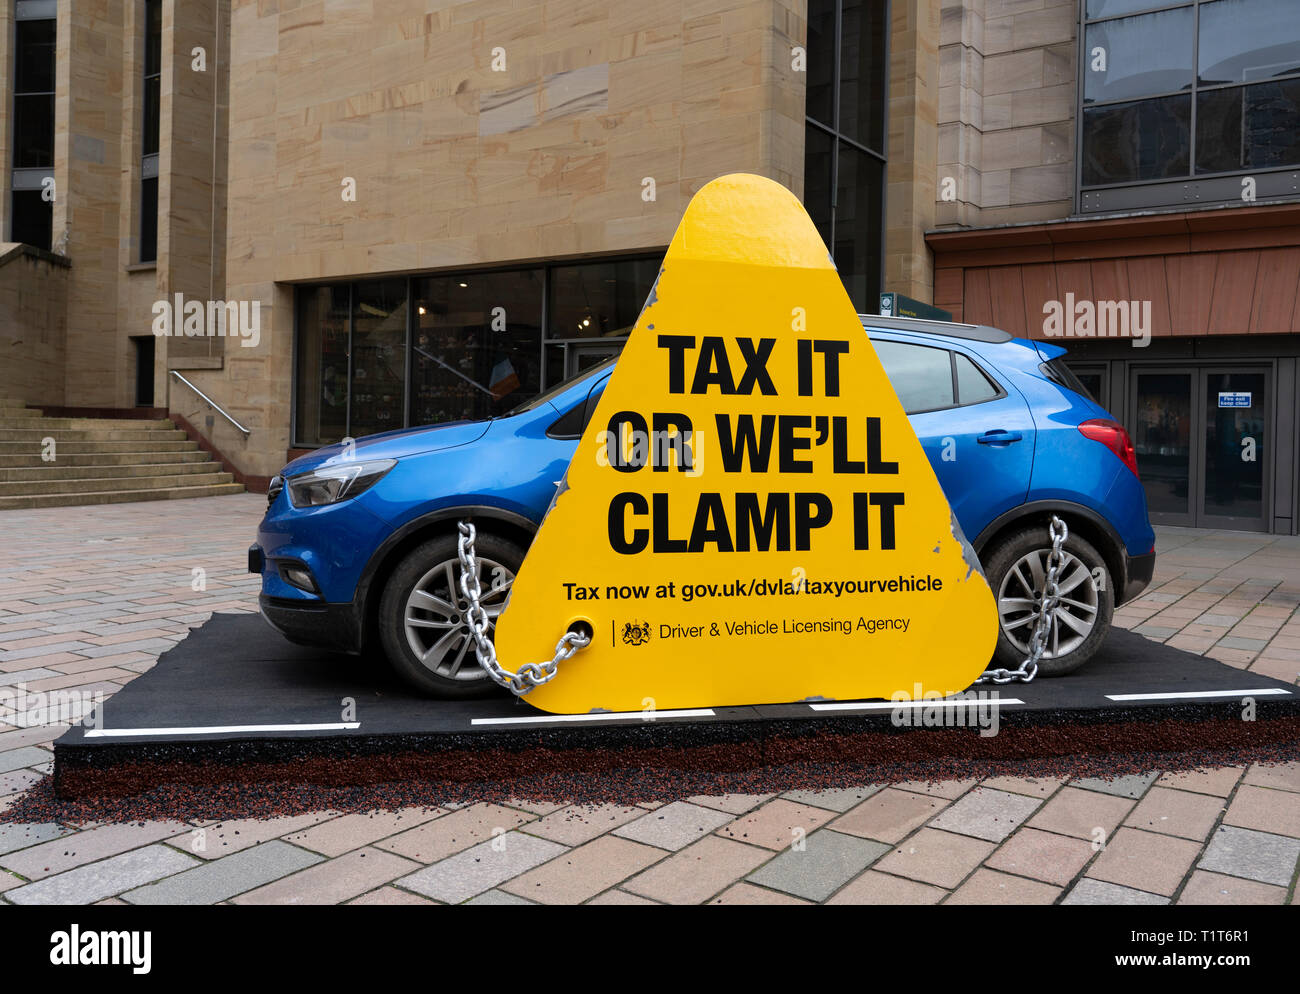 DVLA ( Driver & Vehicle Licensing Agency) public campaign to promote car tax in central Glasgow, Scotland, UK Stock Photo